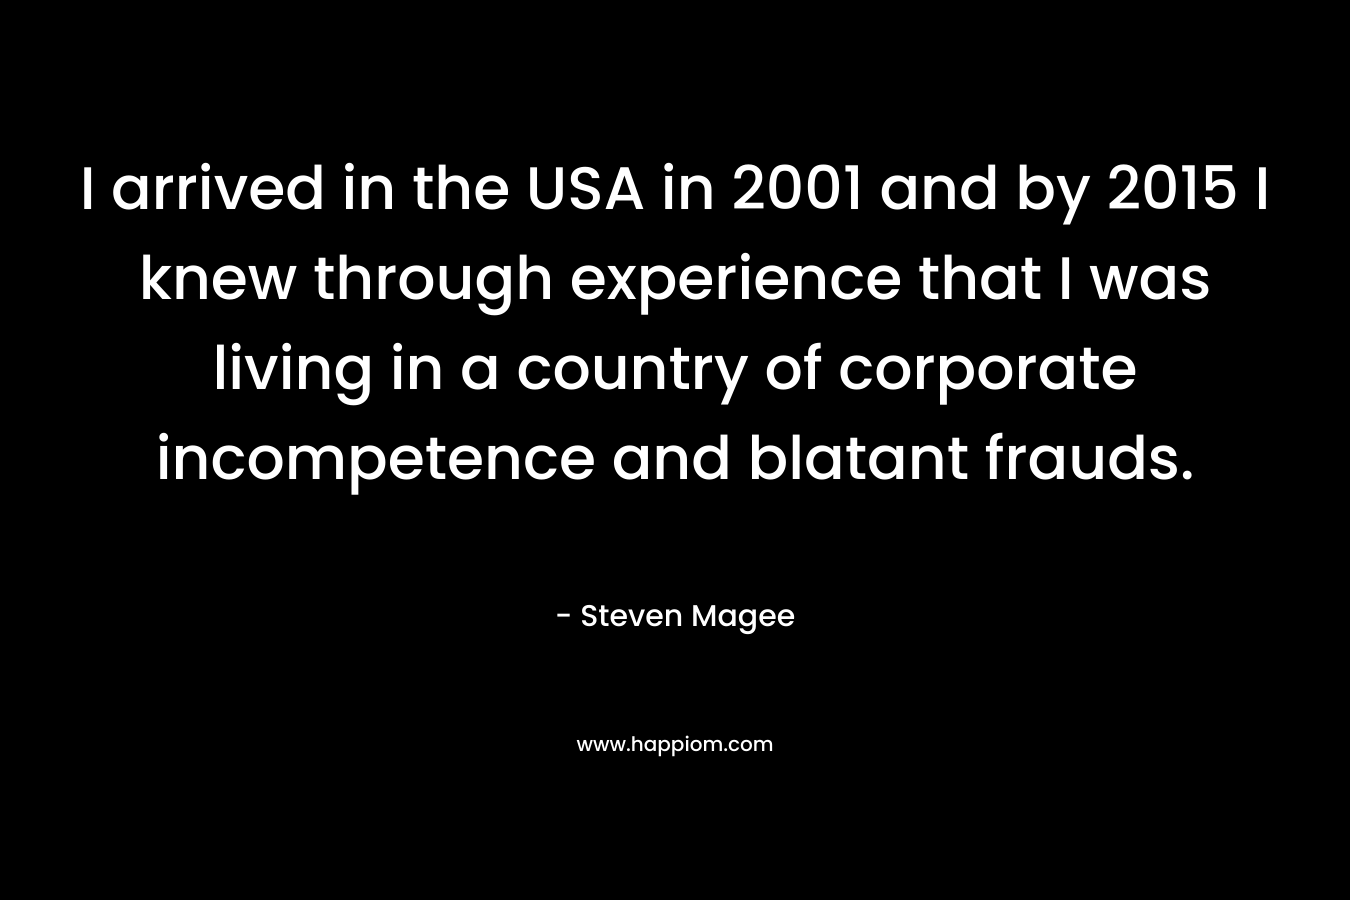 I arrived in the USA in 2001 and by 2015 I knew through experience that I was living in a country of corporate incompetence and blatant frauds. – Steven Magee